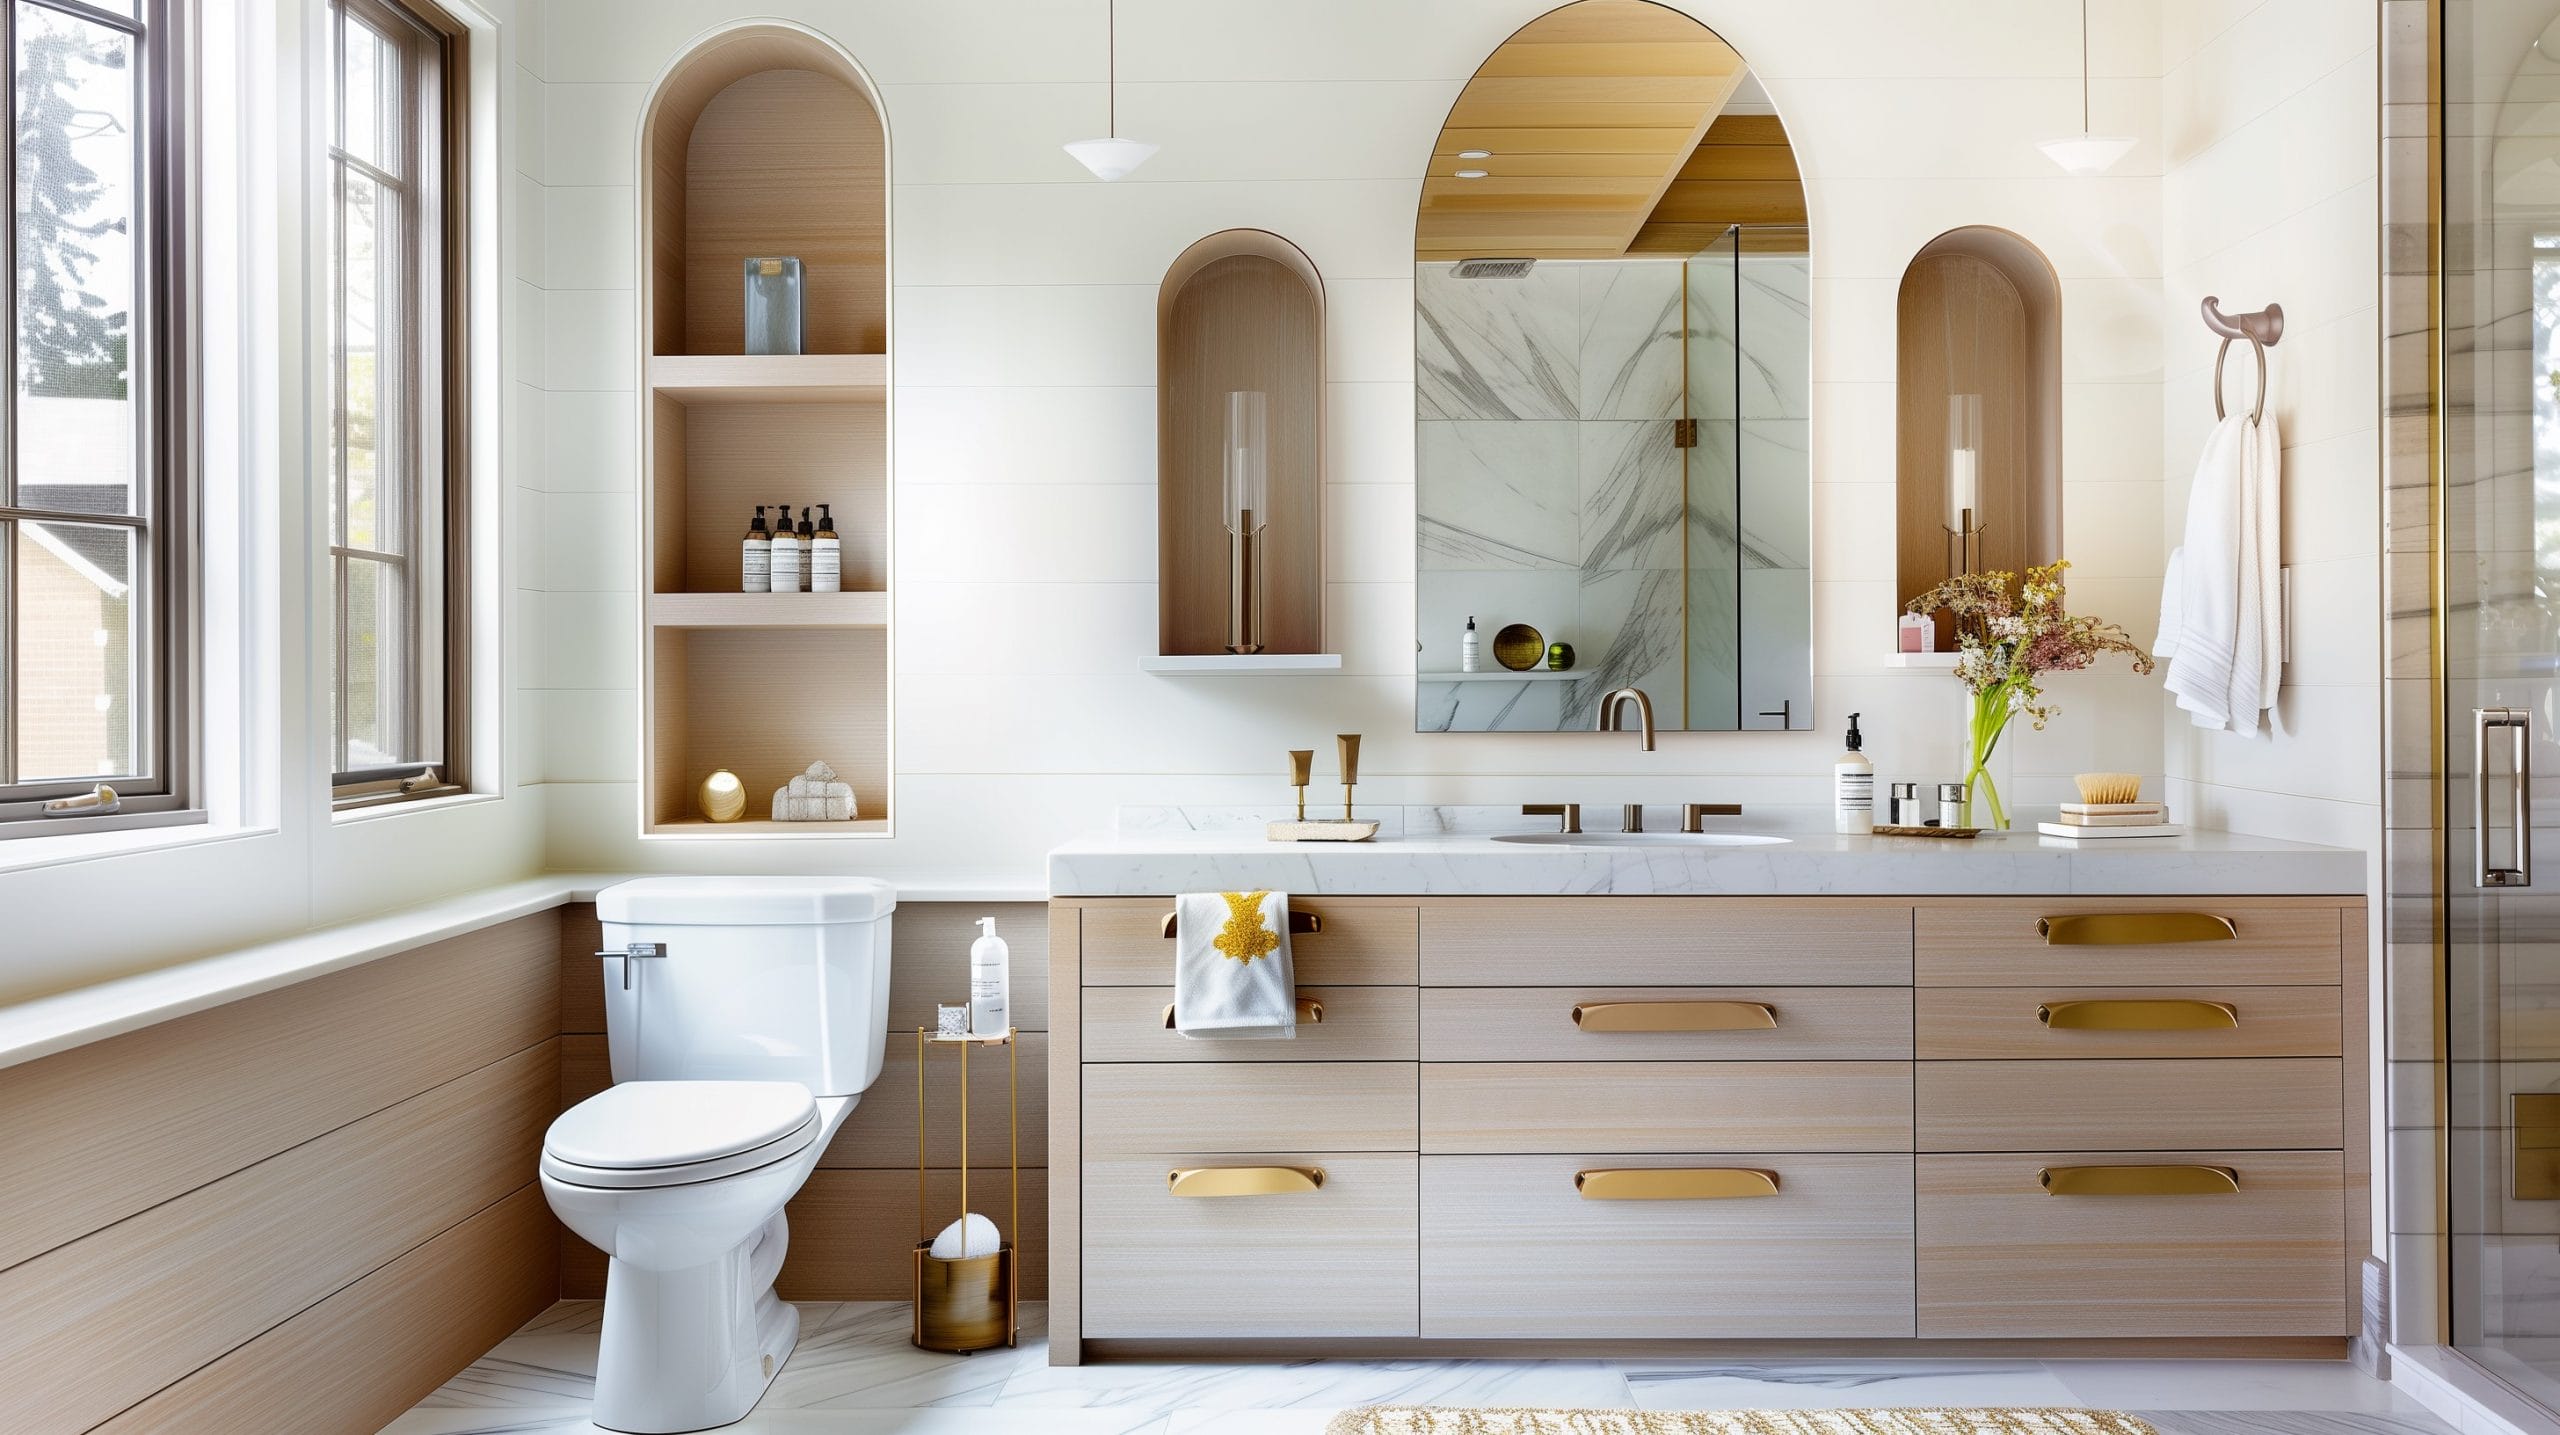 Bathroom Storage Design Ideas: Maximize Your Space with Style